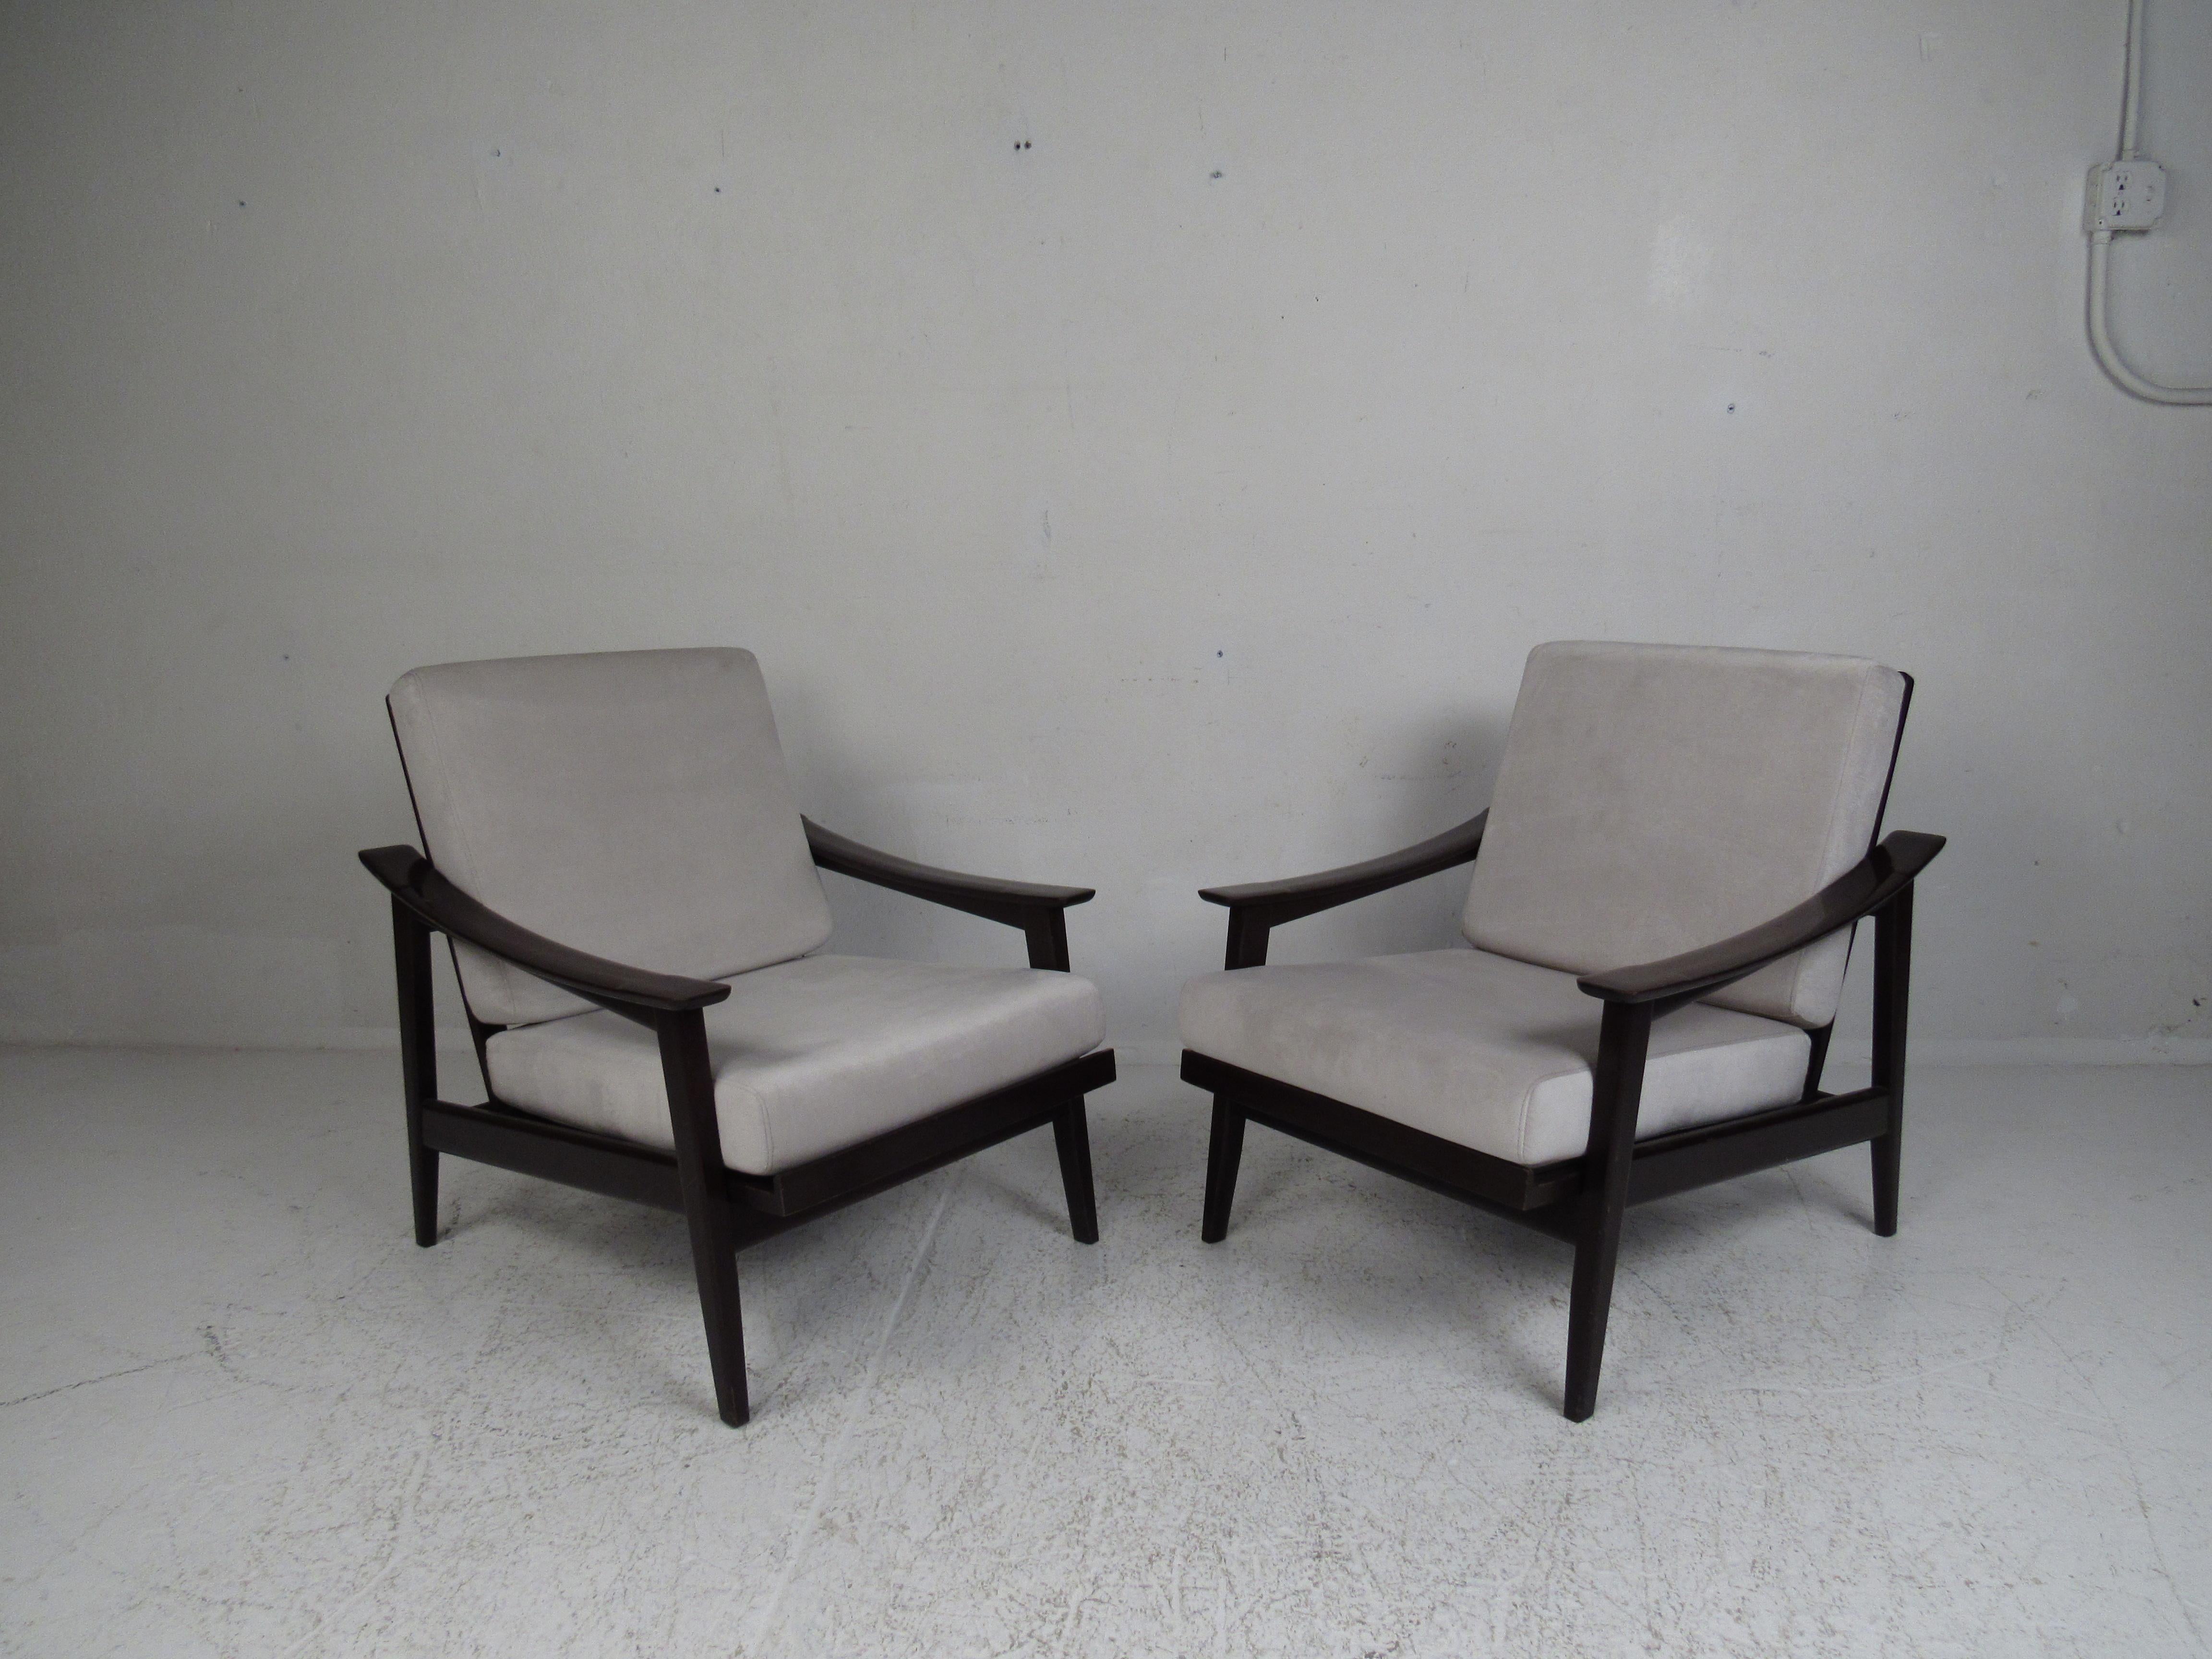 This stunning Mid-Century Modern armchair has the ability to recline, offering extreme comfort in any seating arrangement. The plush off-white velour upholstery covers two overstuffed removable cushions. This sleek pair boasts sloping armrests with